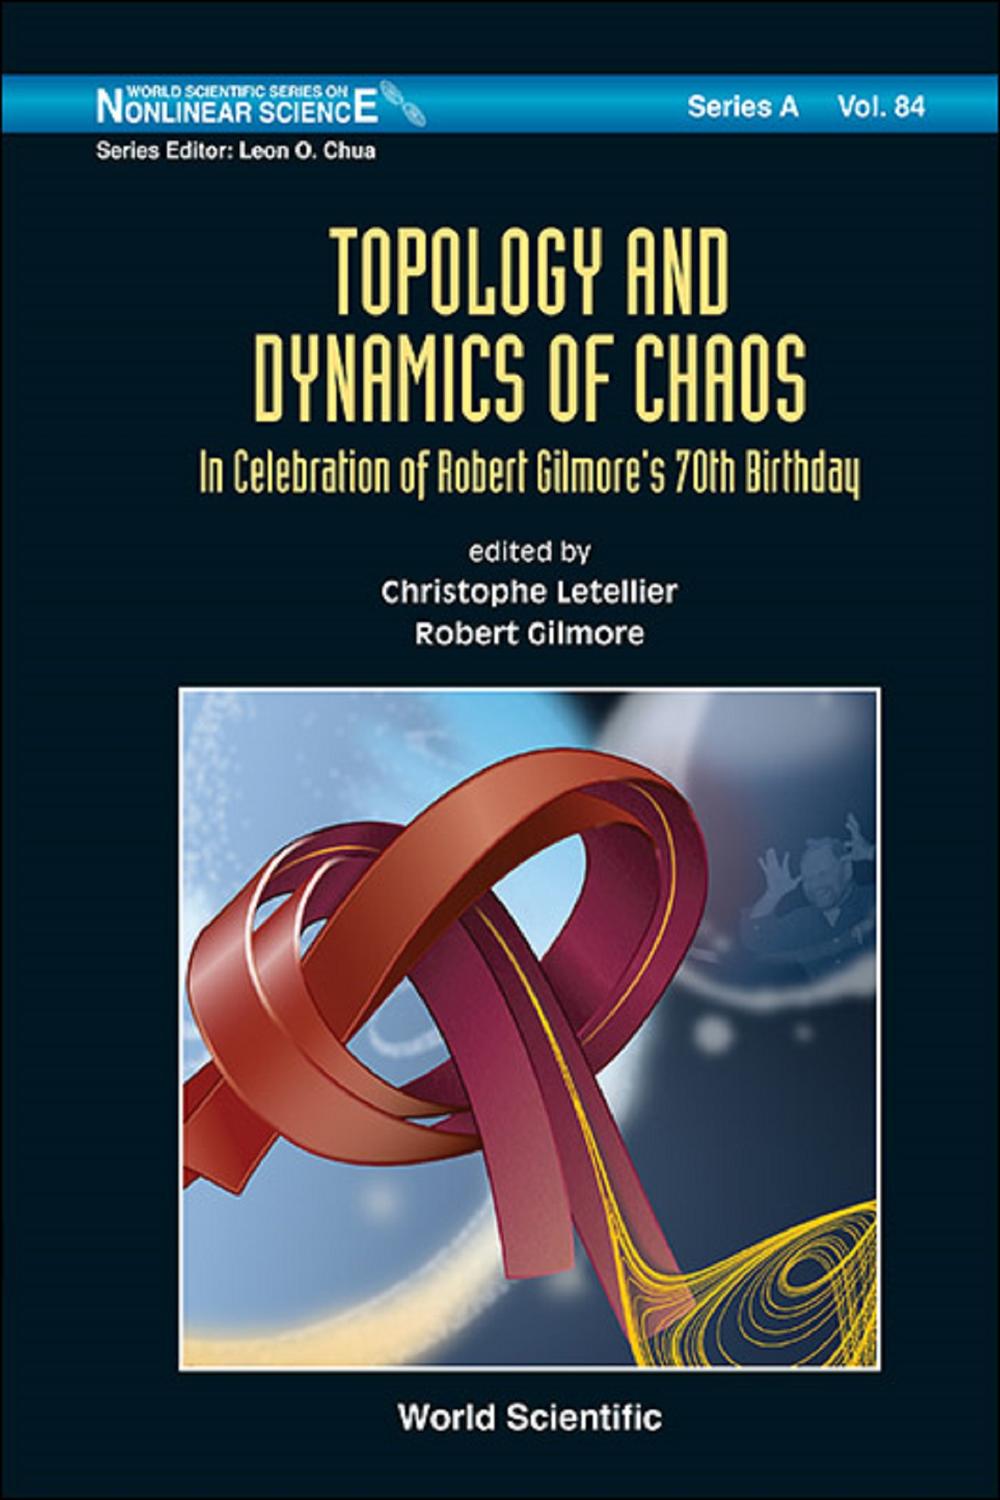 Topology And Dynamics Of Chaos: In Celebration Of Robert Gilmore's 70th Birthday - Christophe Letellier, Robert Gilmore